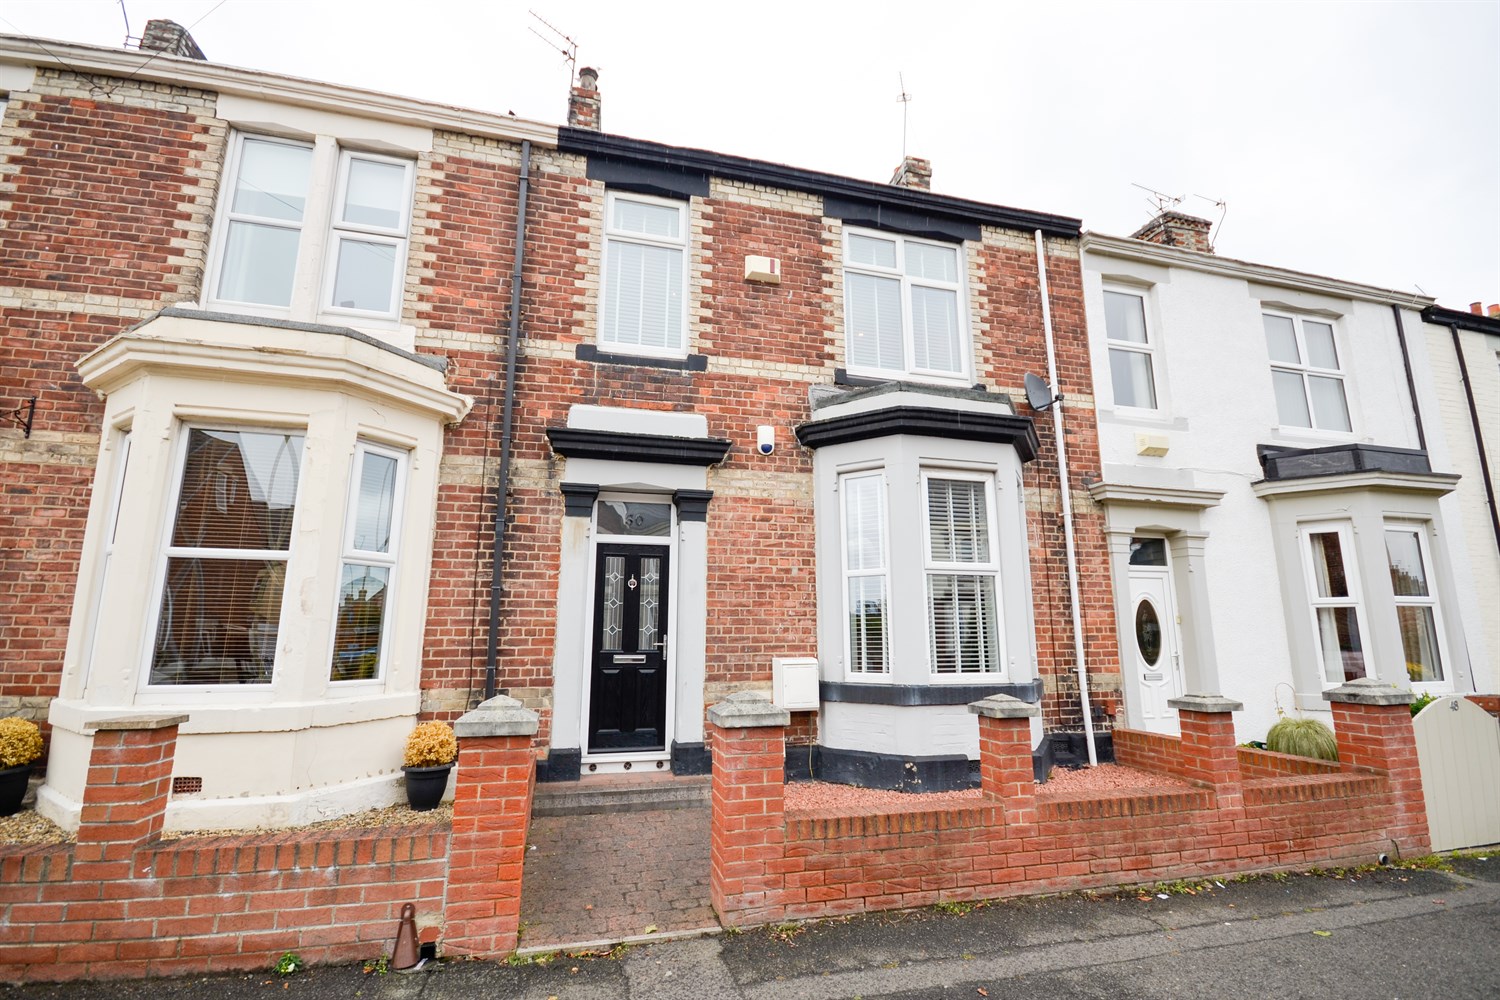 3 bed house for sale in Kent Street, Jarrow - Property Image 1